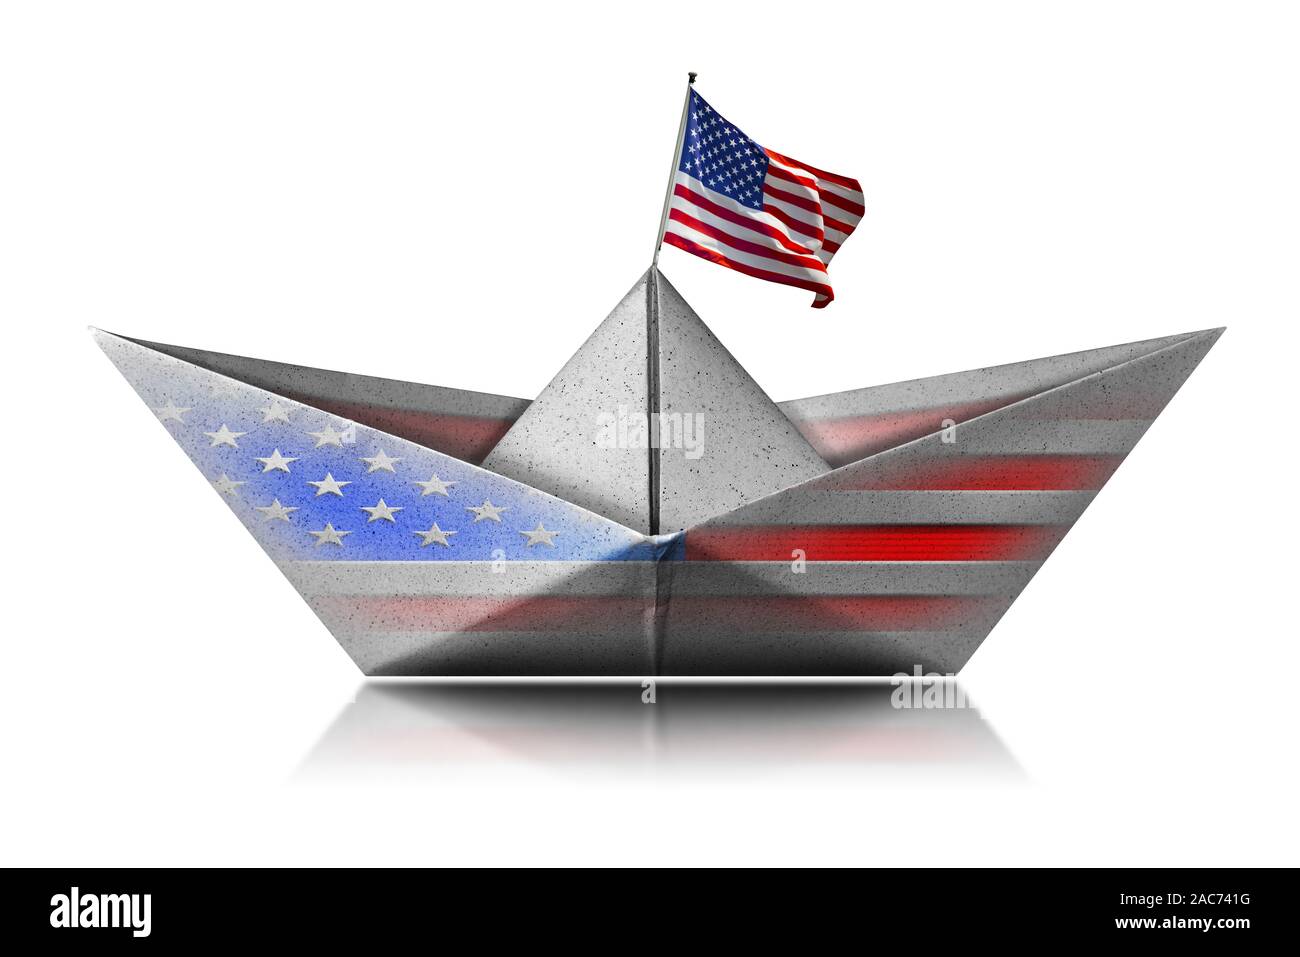 White paper boat with the United states of America flag, isolated on white background with reflections, photography Stock Photo